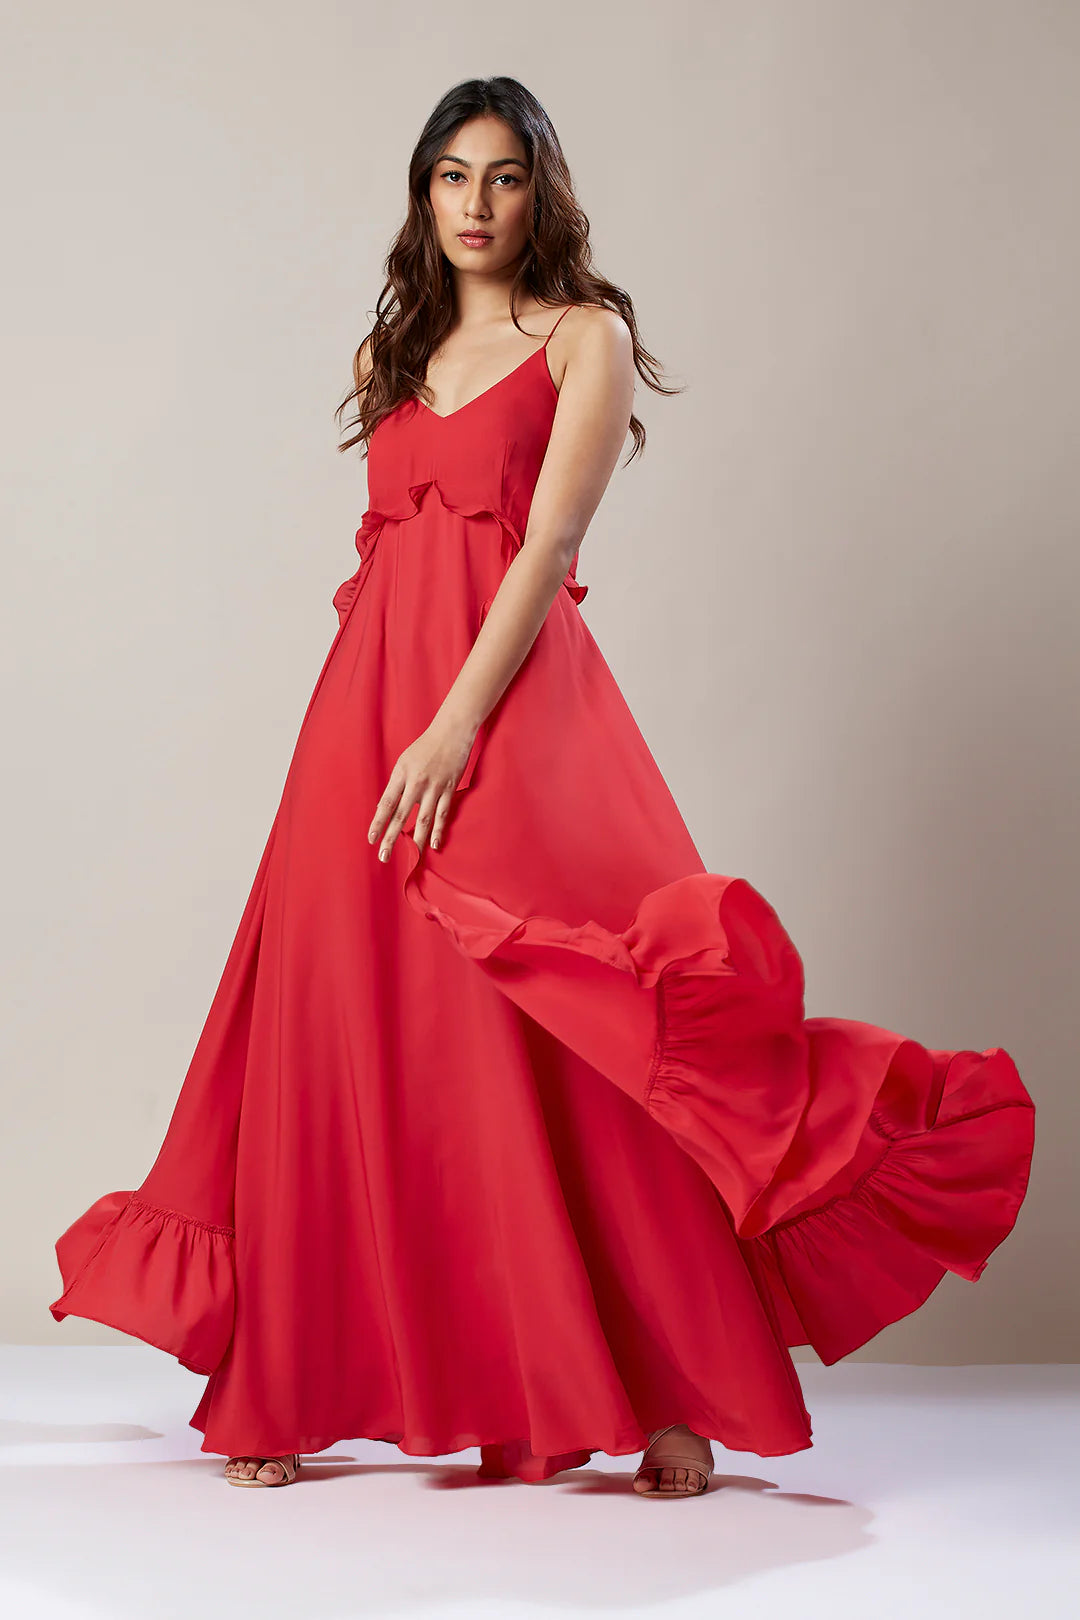 Image of Gorgeous and modern, this STRAPPY RED DRESS EMBELLISHED WITH RUFFLES is a must-have for any wardrobe. Crafted from quality crepe fabric and featuring ruffle detailing, this dress is designed to provide a timeless and elegant look. It's perfect for any occasion!  From savoirfashions.com